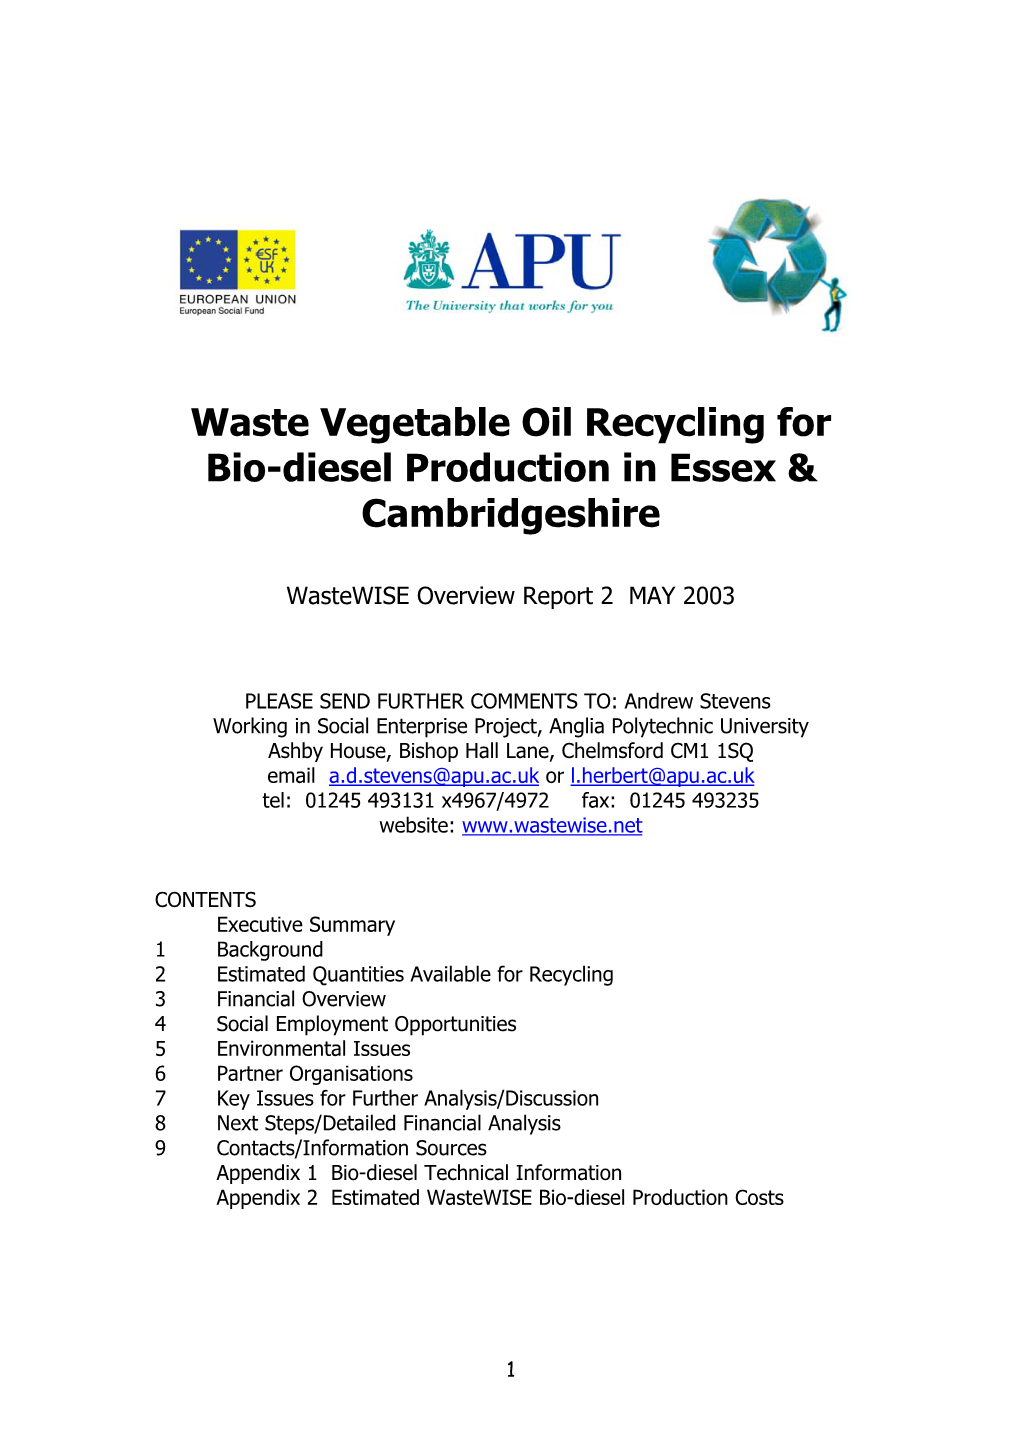 Waste Vegetable Oil Recycling for Bio-Diesel Production in Essex & Cambridgeshire